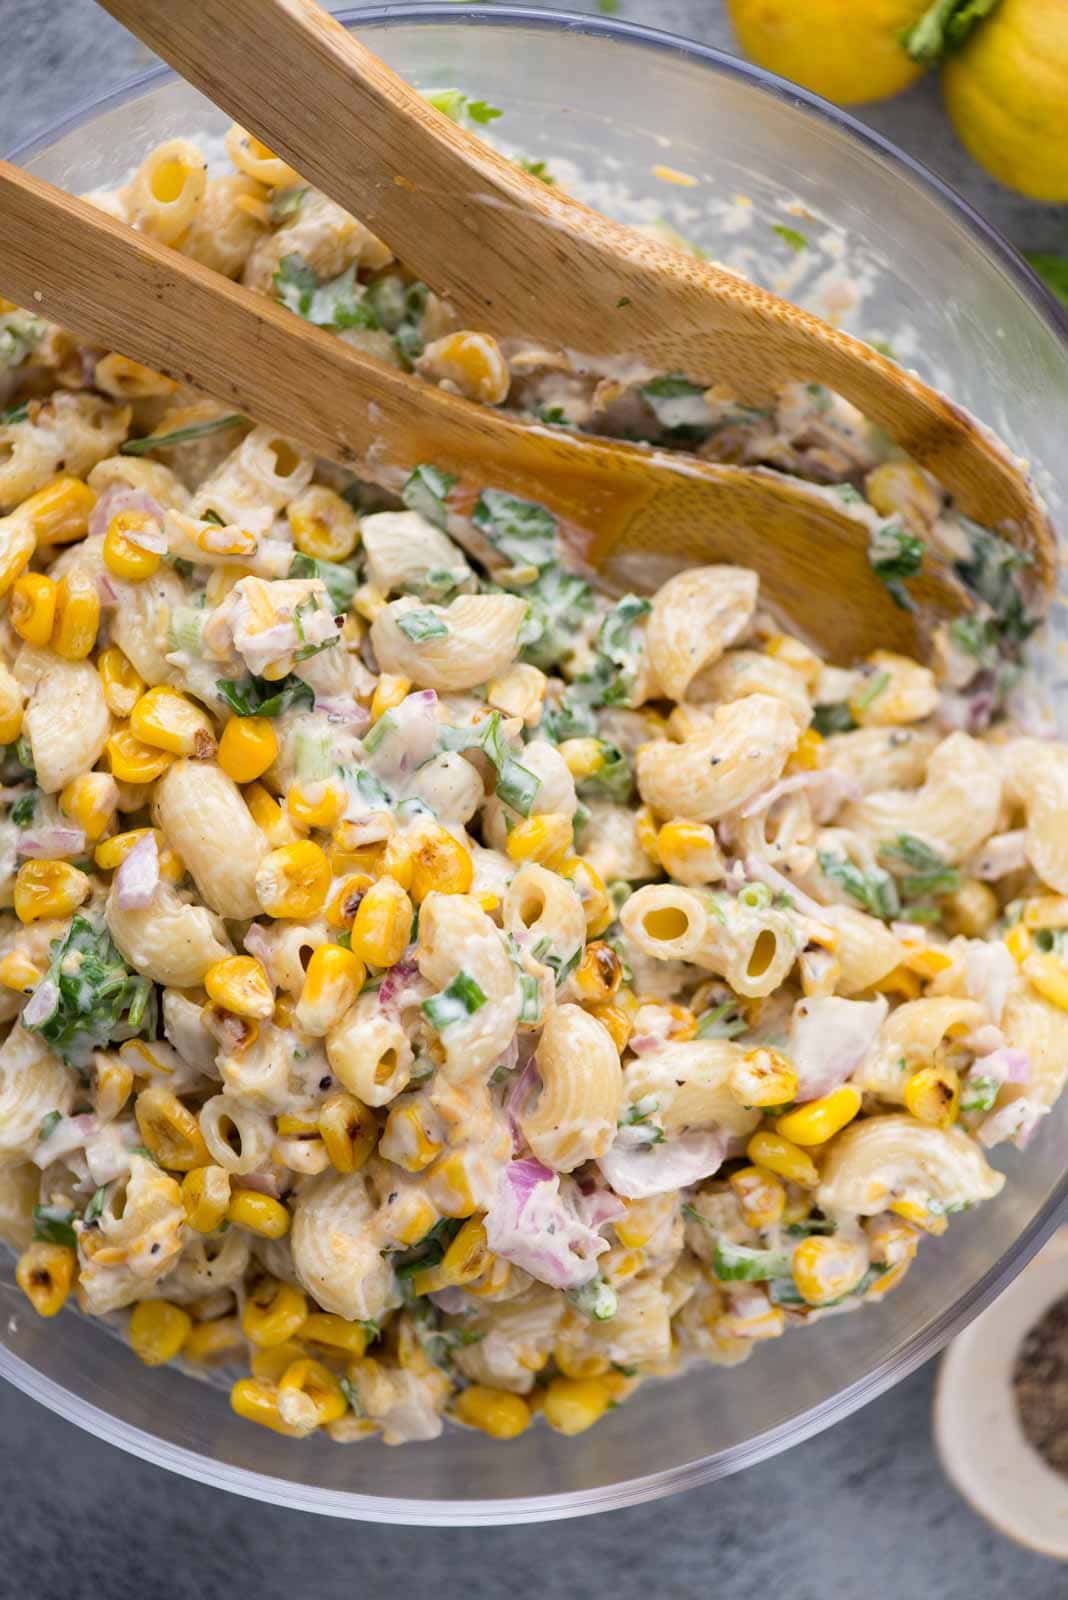 Roasted corn pasta salad tossed in a mayo-based dressing with wooden spatulas.